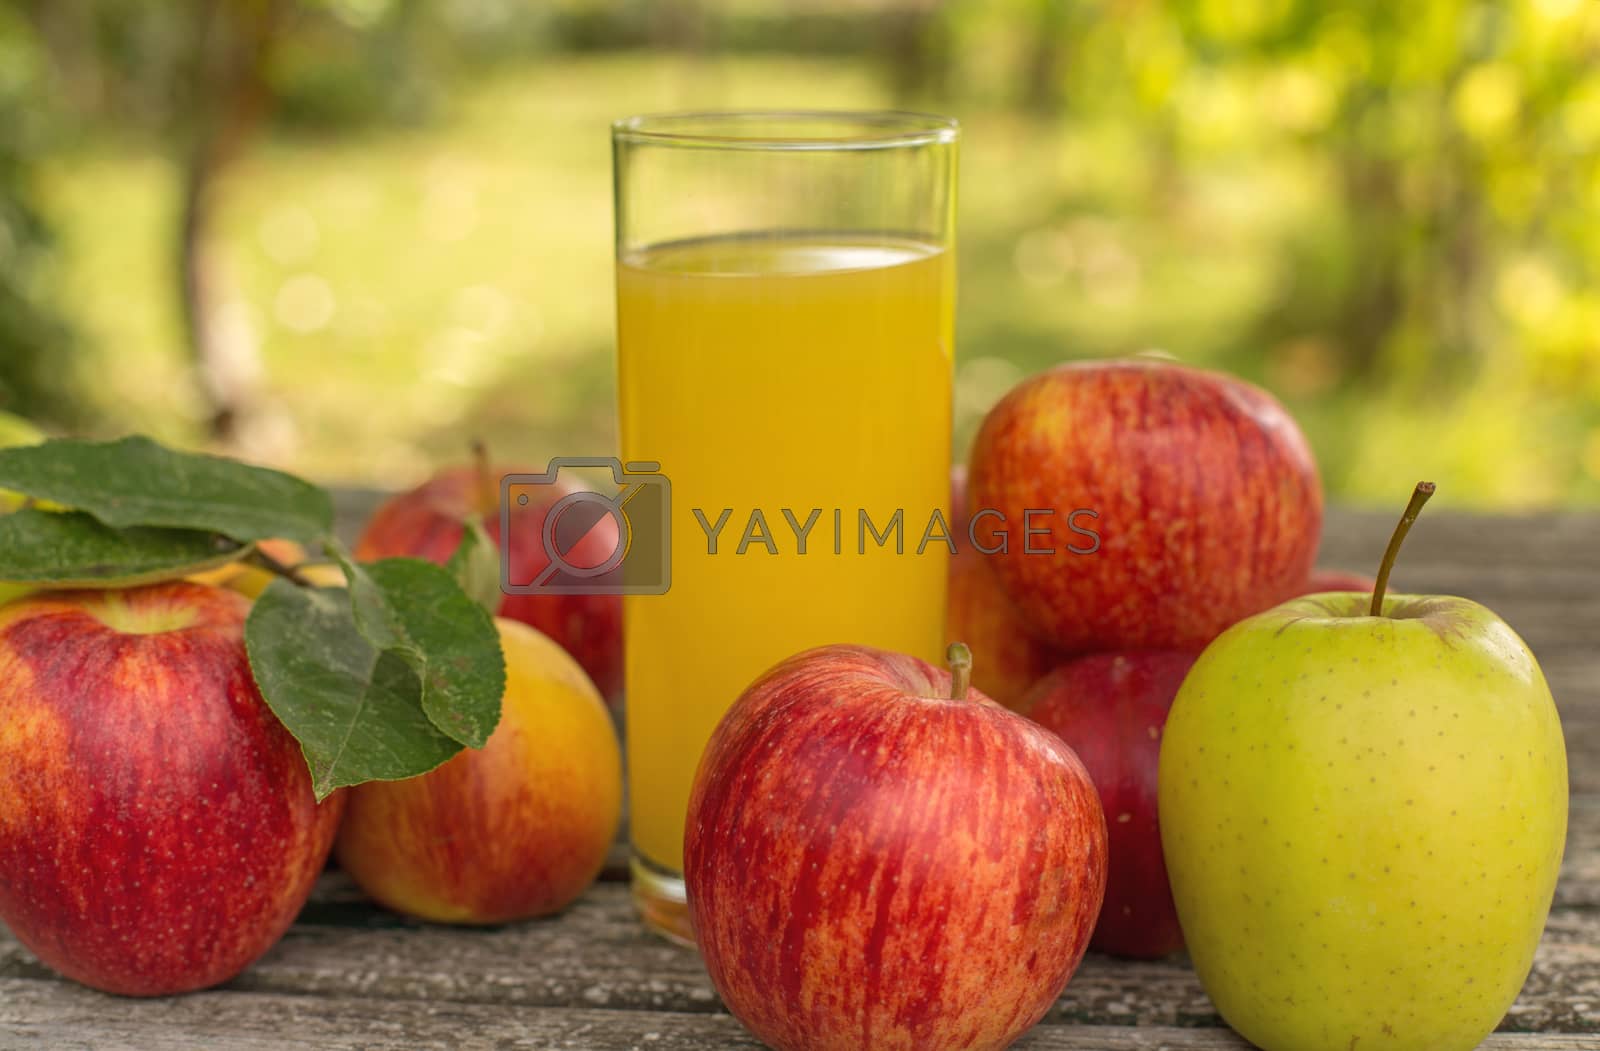 Royalty free image of fruits and juice by zittto